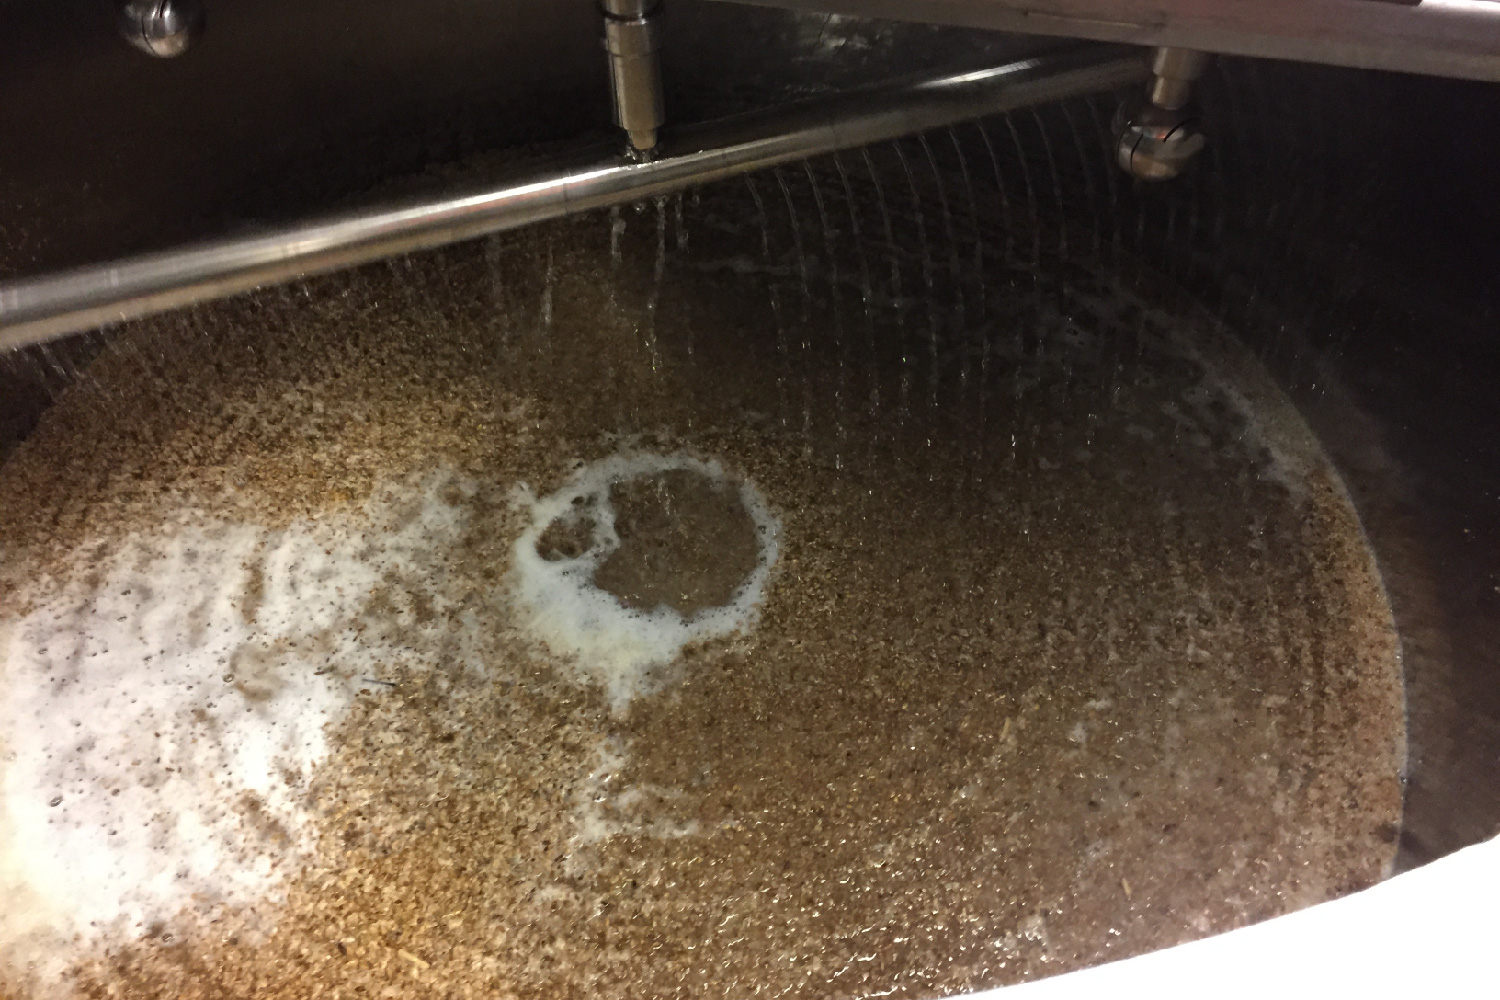 A look inside the vat of a beer brew after mashing